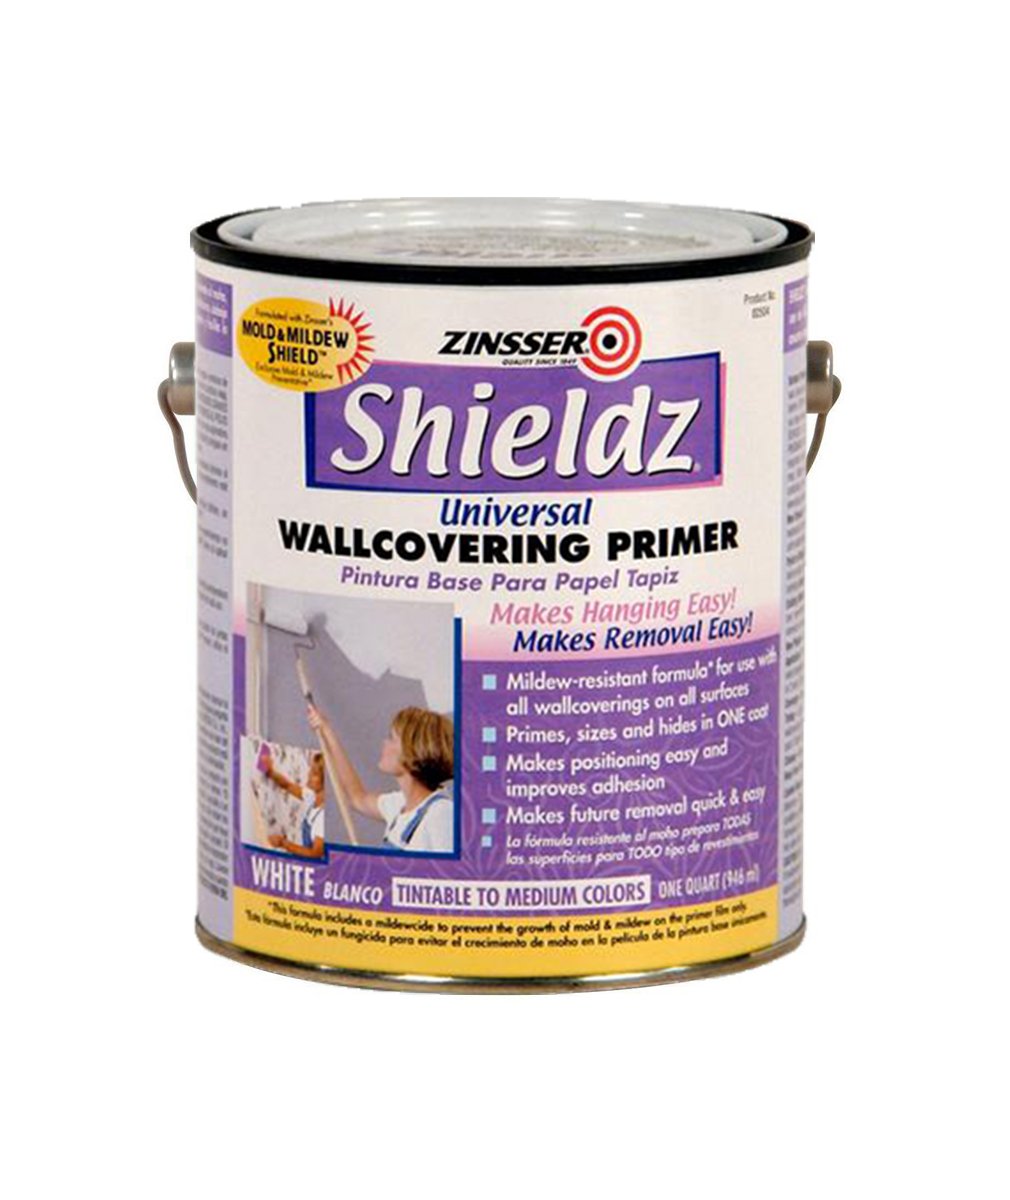 Shieldz® Universal Wallcovering Primer,  available at JC Licht in Chicago, IL.